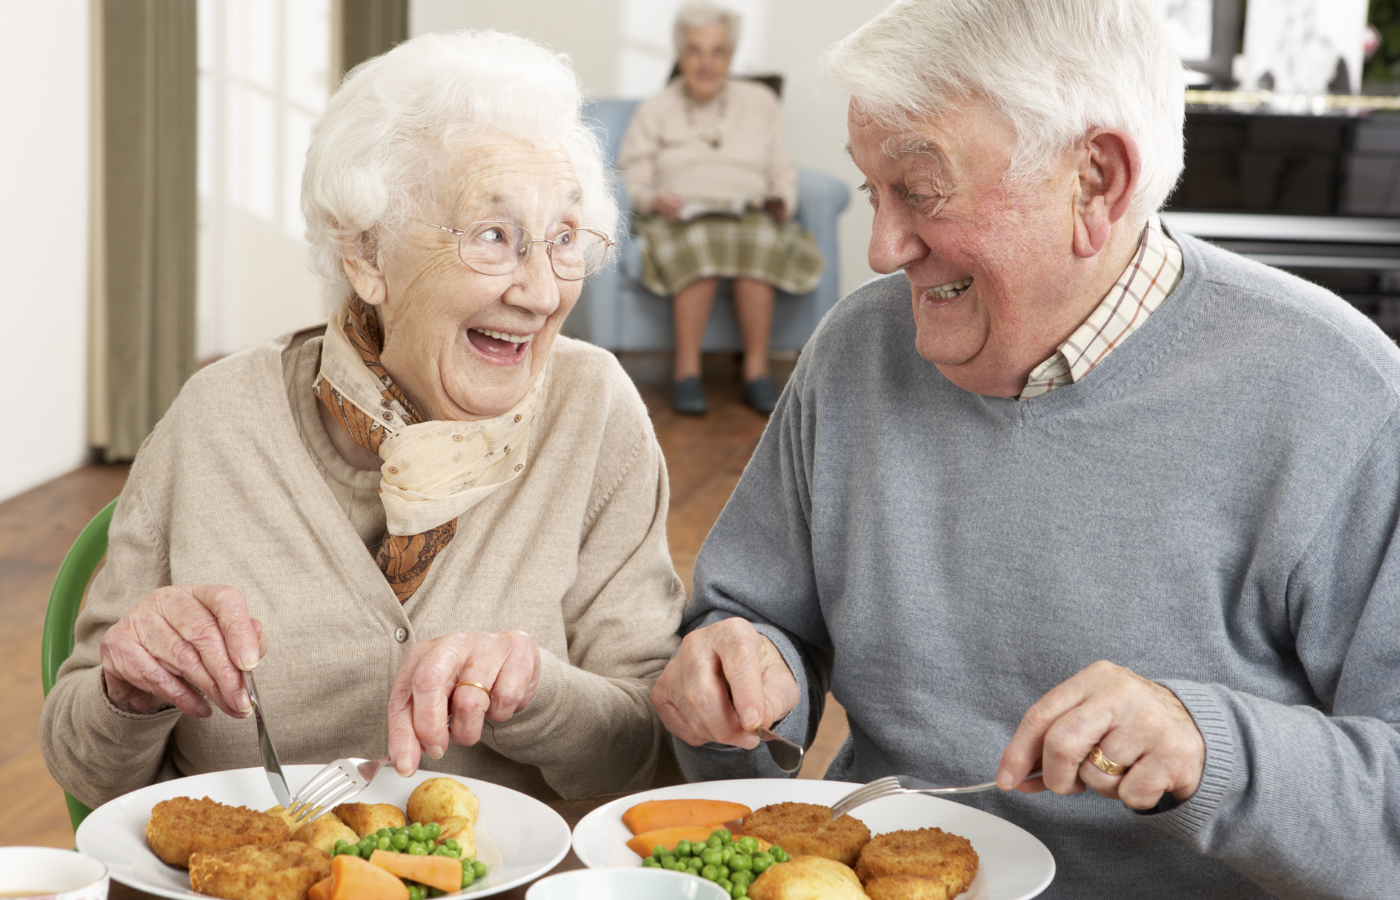 older woman and man enjoying a meal, smiling at each other.